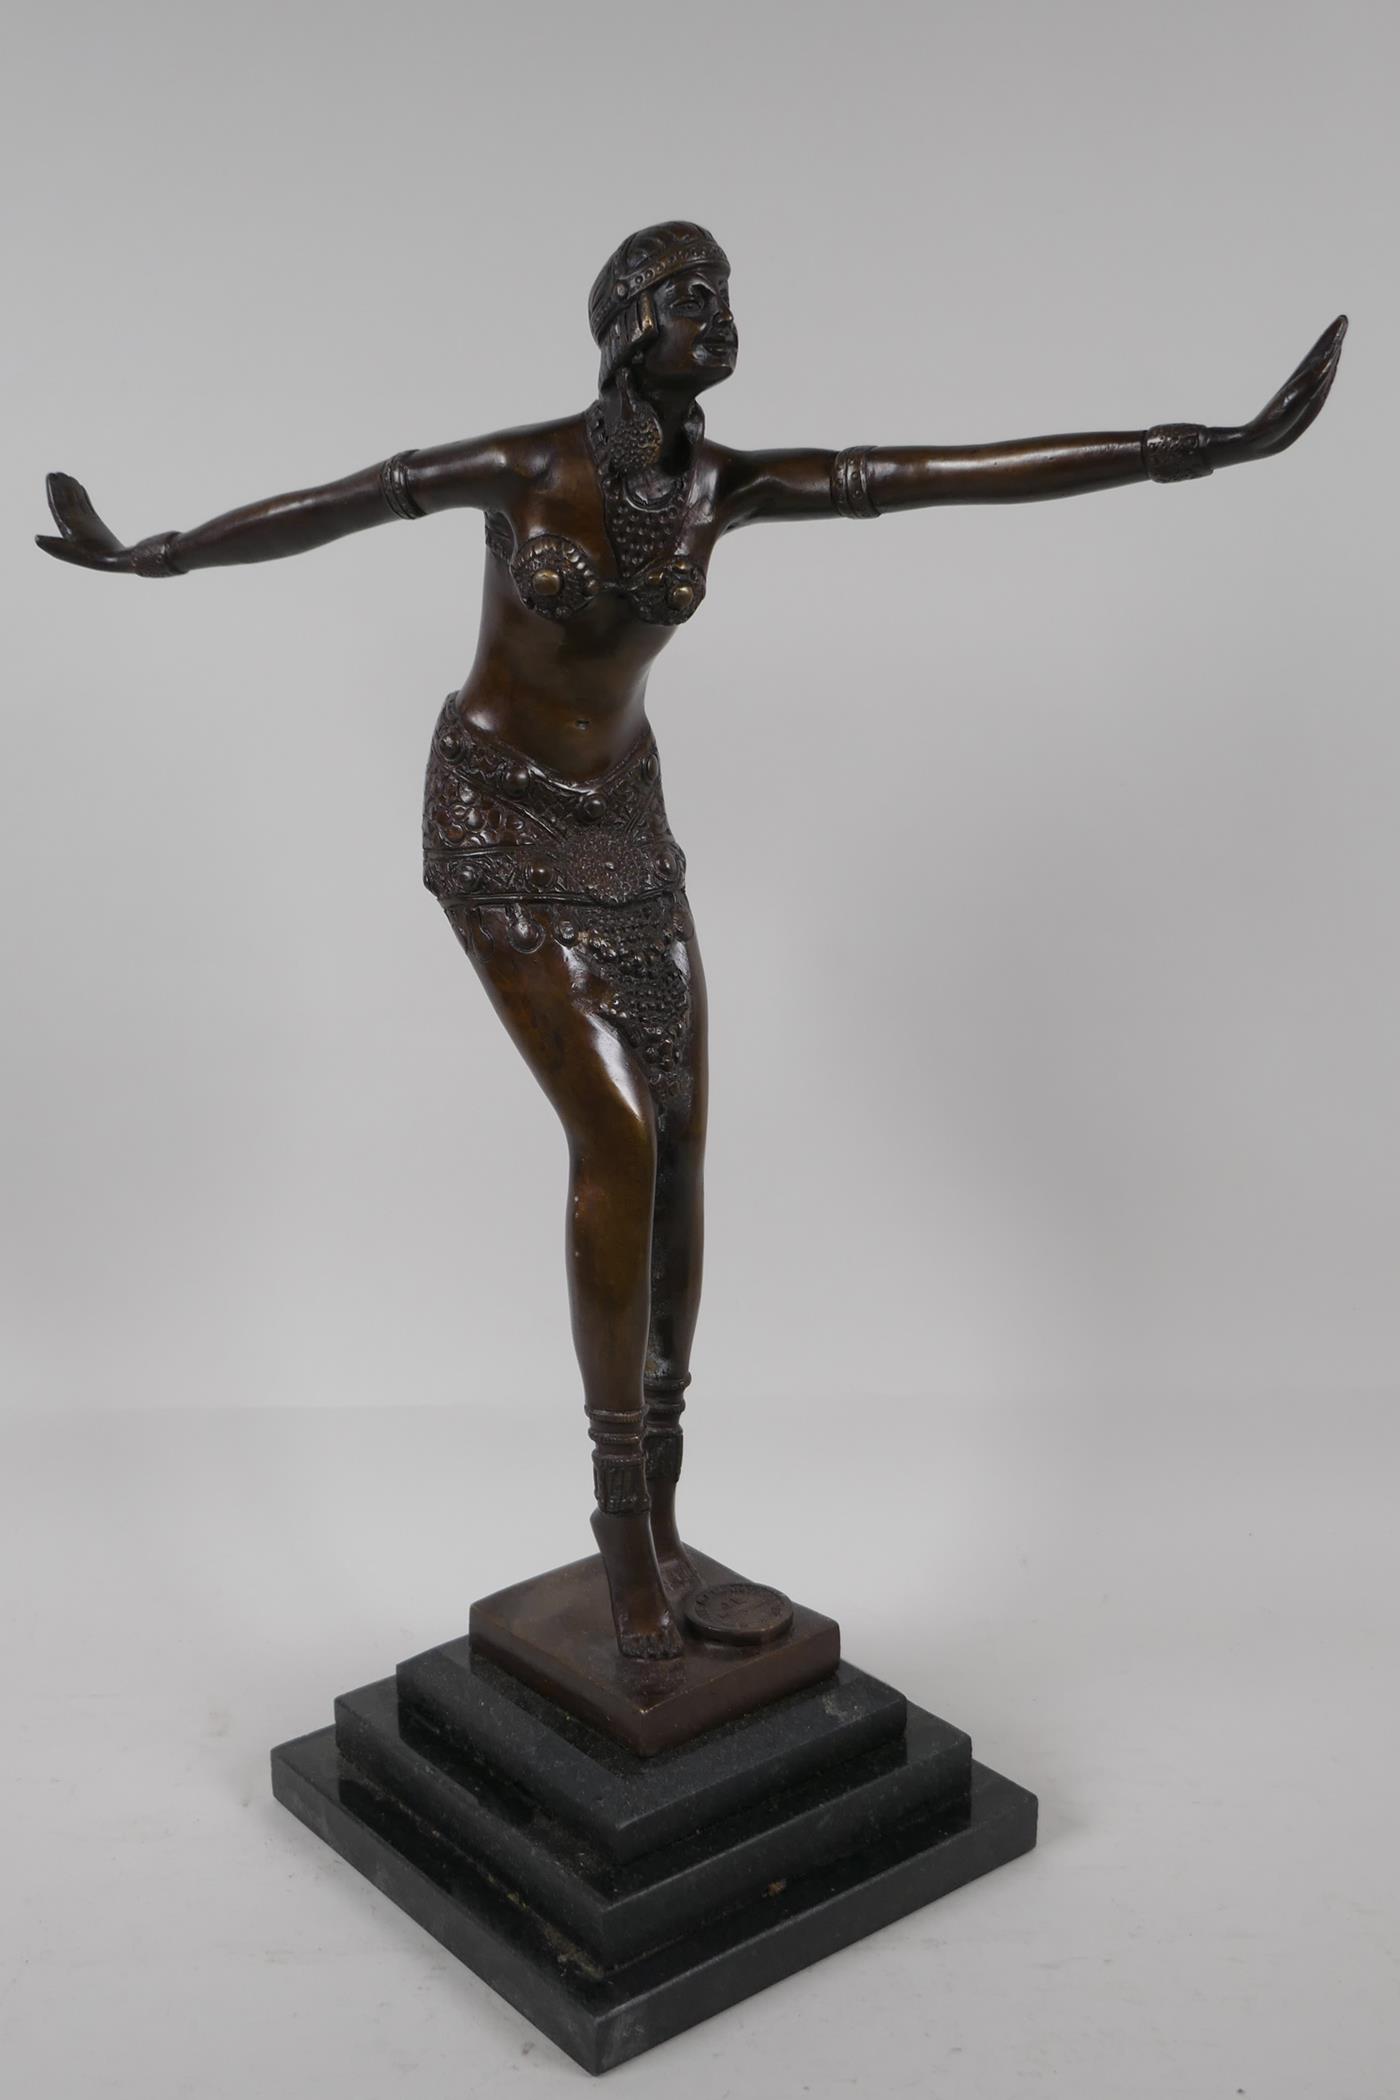 An Art Deco style figurine of a dancing girl, after Preis, on a stepped base, 16½" high